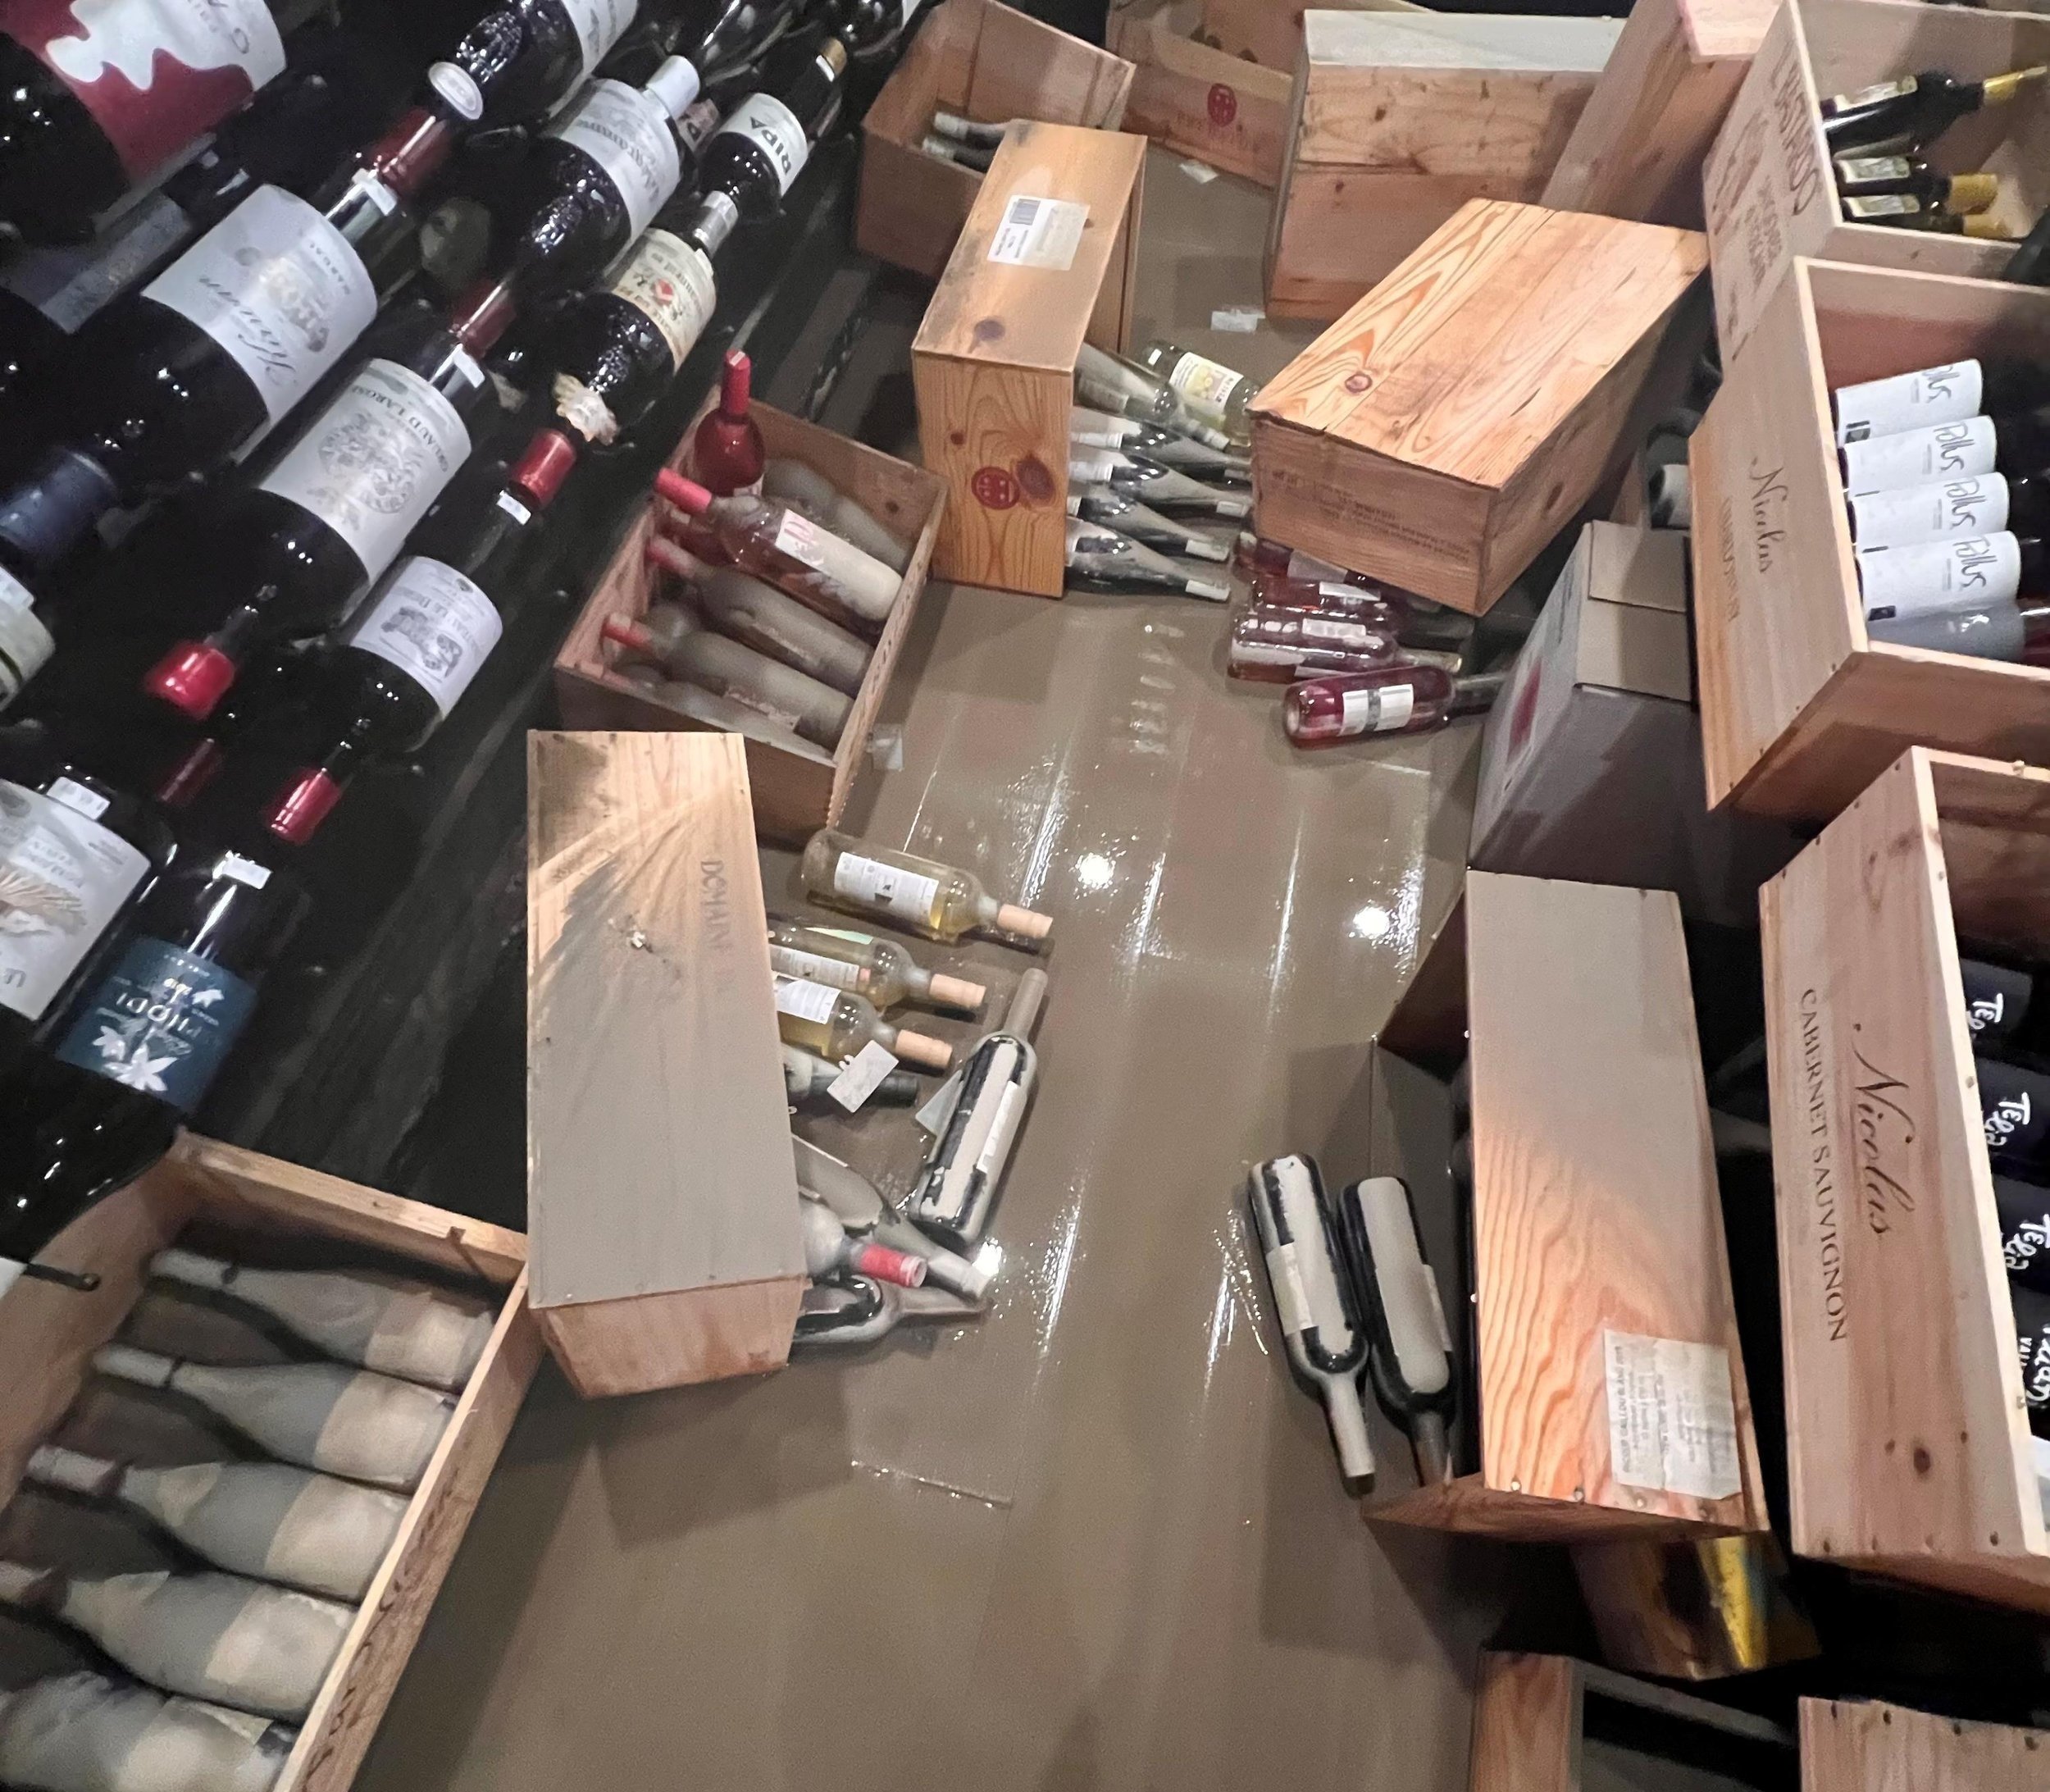  A thin layer of river residue coats the low-lying inventory at the Wine Vault after the water recedes. Courtesy photo 